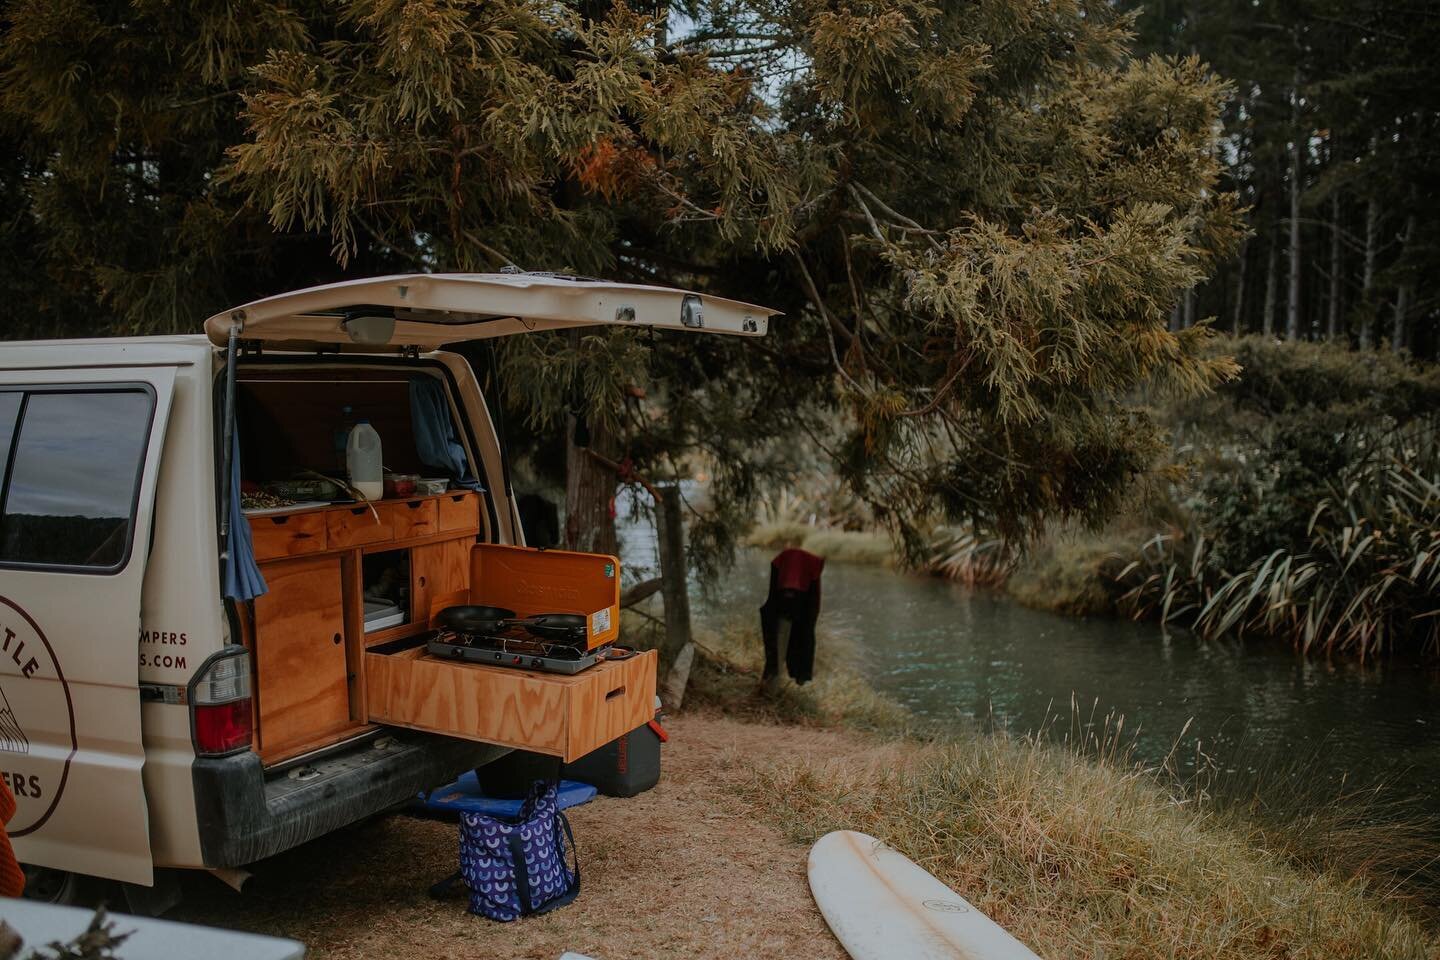 Idyllic little spot by the stream @opouterecoastalcamping .
.
.
.
.

📸 @amysmagiclife 
#vanlife #campervan #homeiswhereyouparkit #travel #roadtrip #vanlifediaries #camper #camping #van #adventure #vanlifers #camperlife #homeonwheels #nature #wanderl